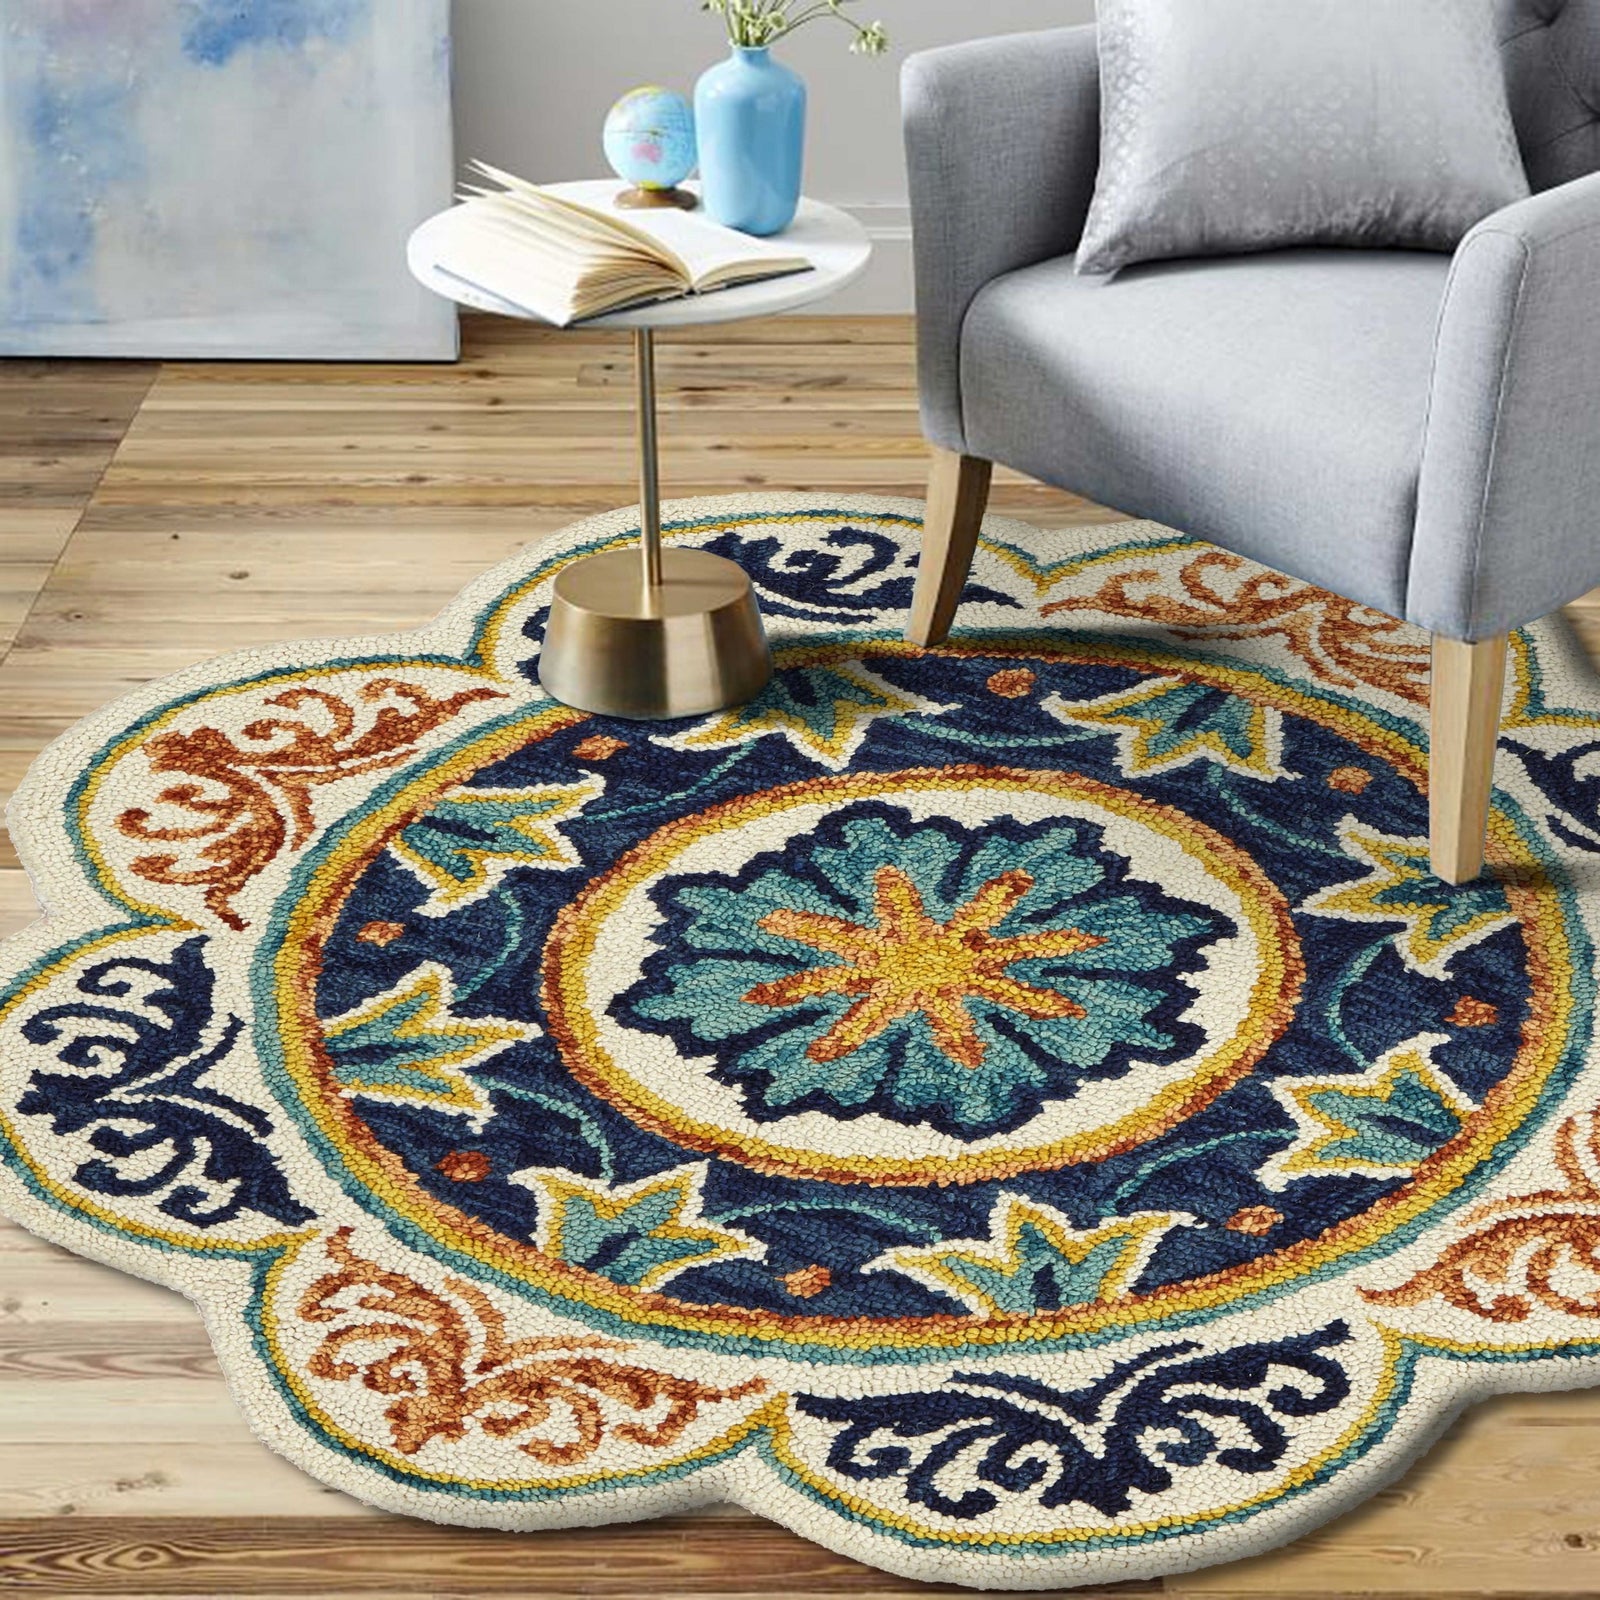 4’ Round Ivory And Navy Decorative Area Rug